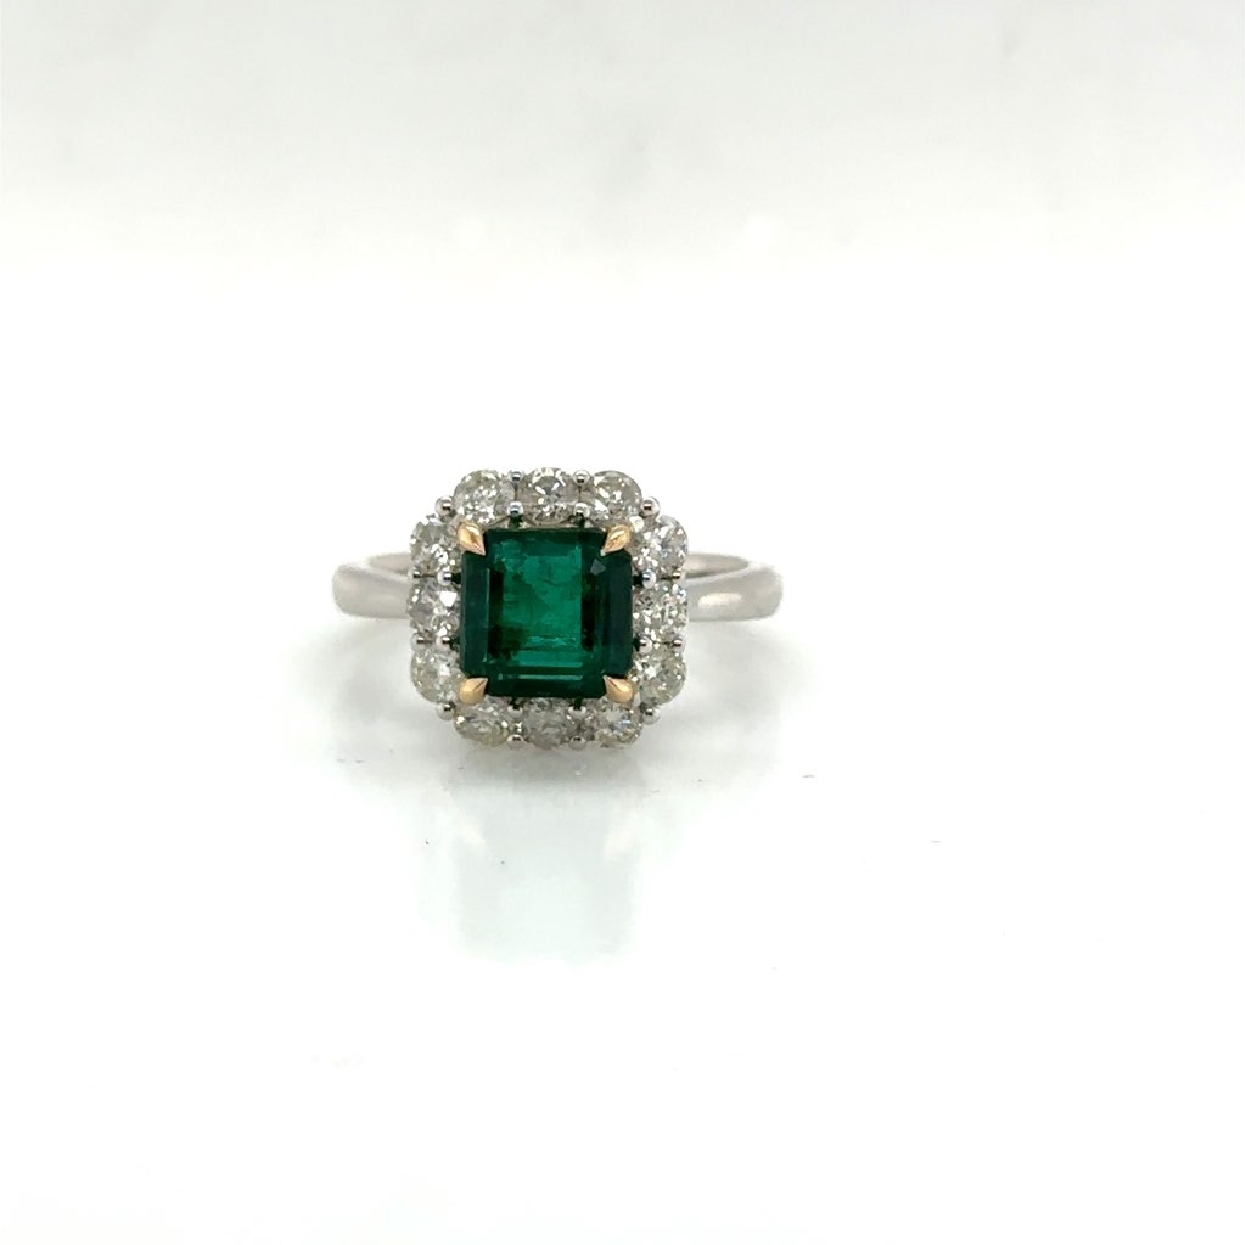 18K White and Yellow Gold Ring with a 2.2 ct Square Cut Emerald and .96 ct Diamond Halo 
Size 7